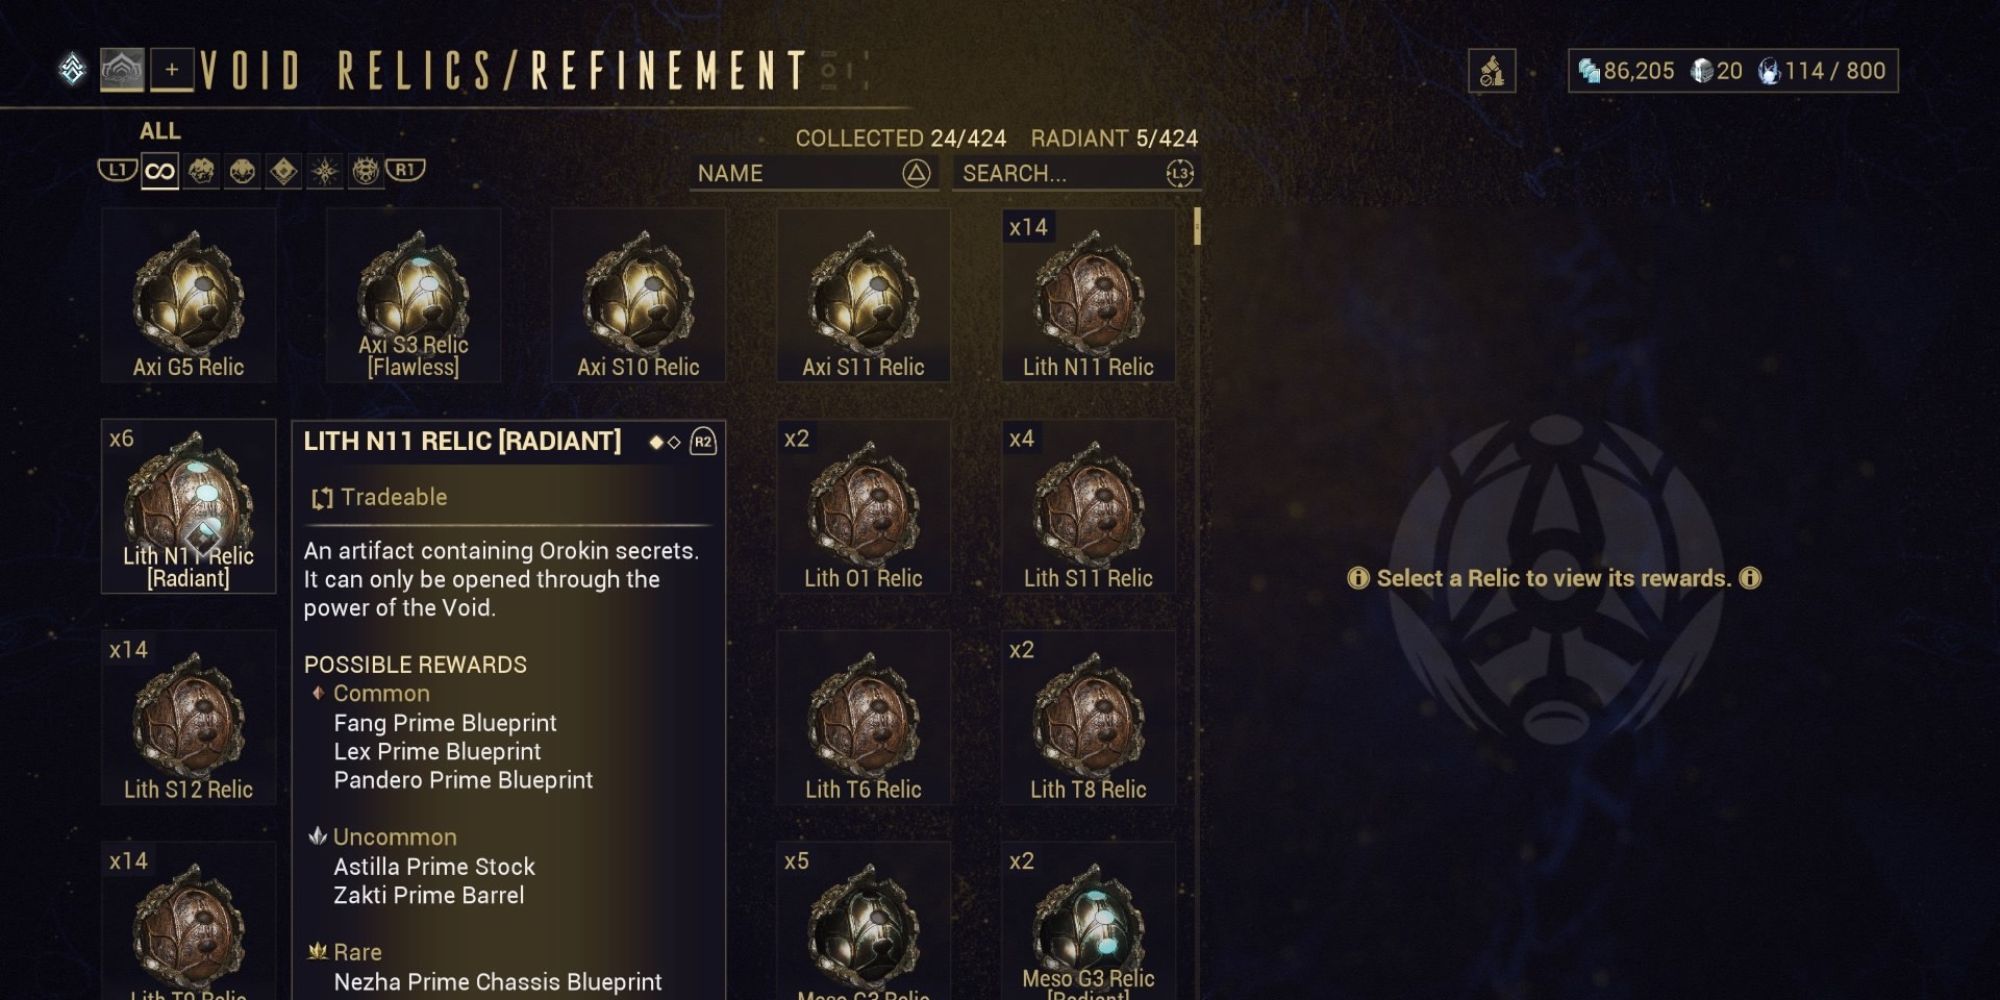 The refinement page on Void Relics on Warframe